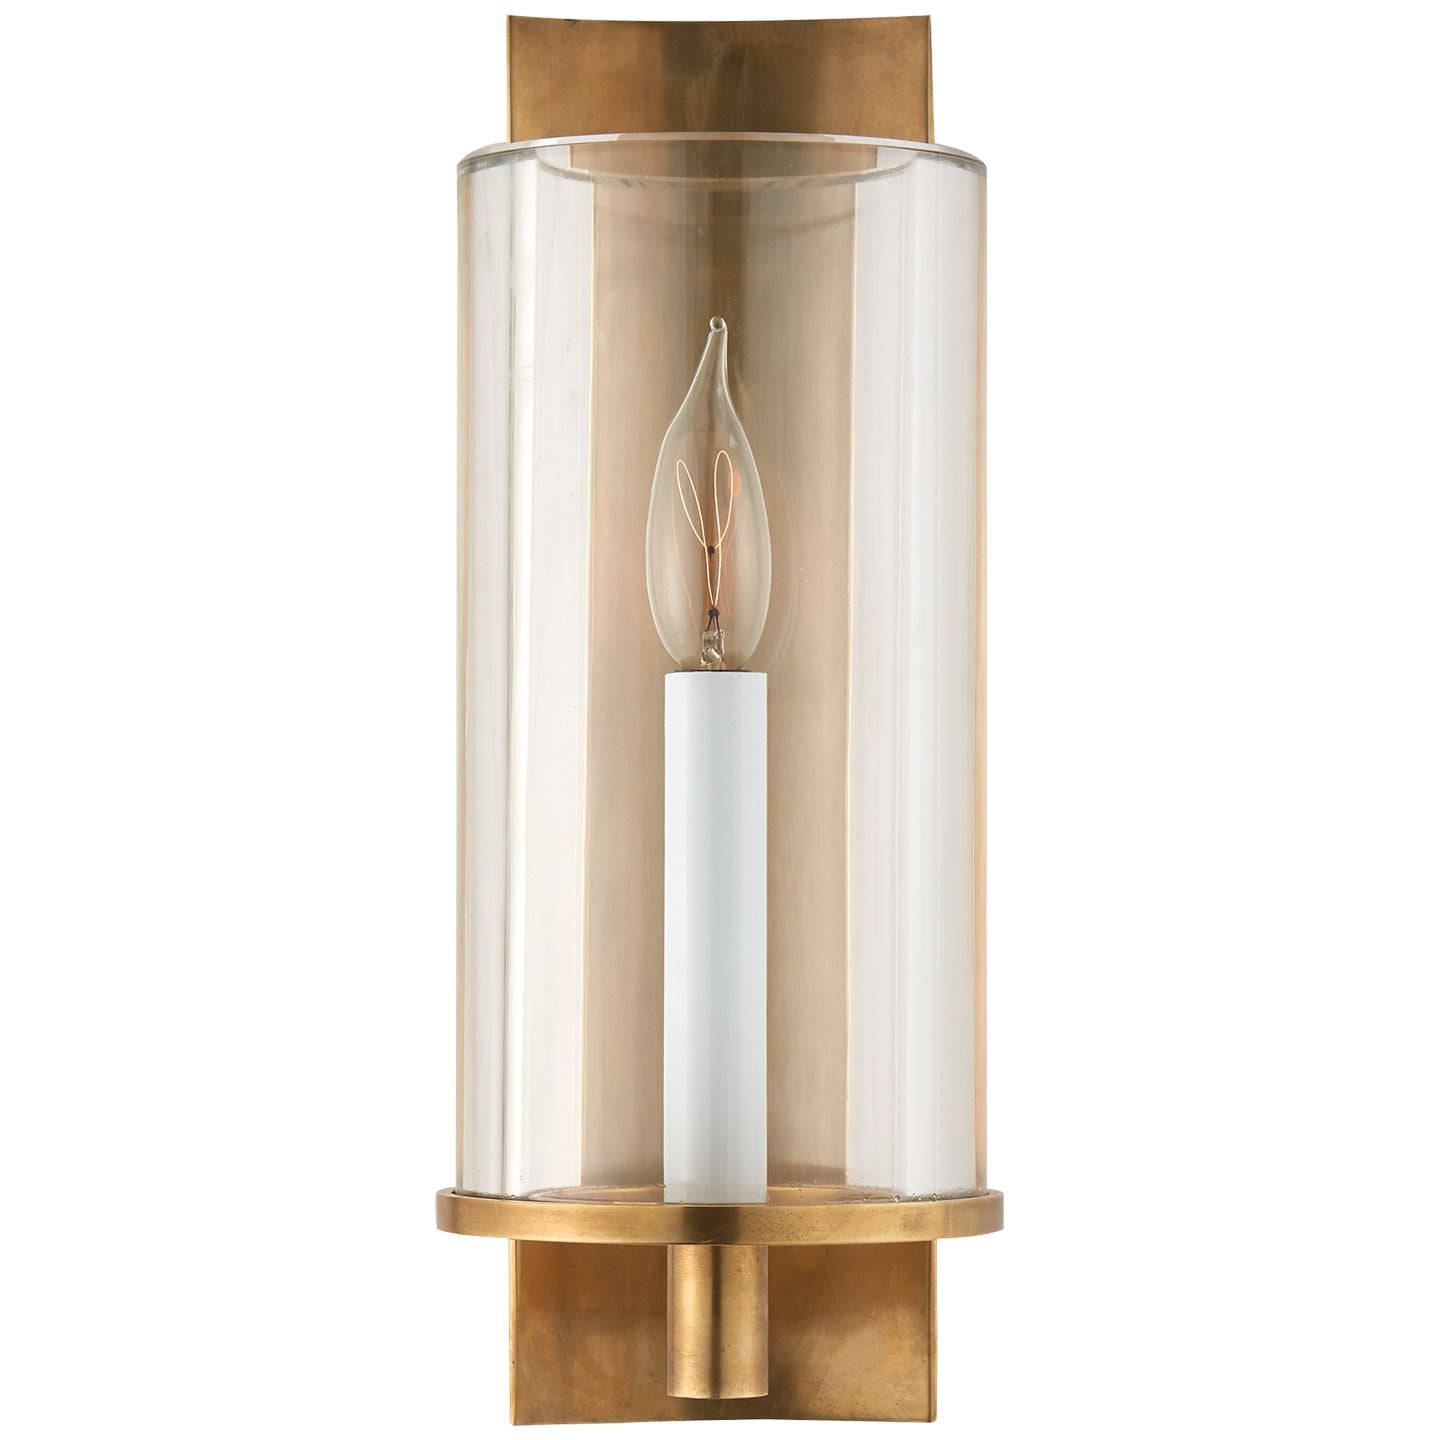 Deauville Single Sconce in Hand-Rubbed Antique Brass with Clear Glass